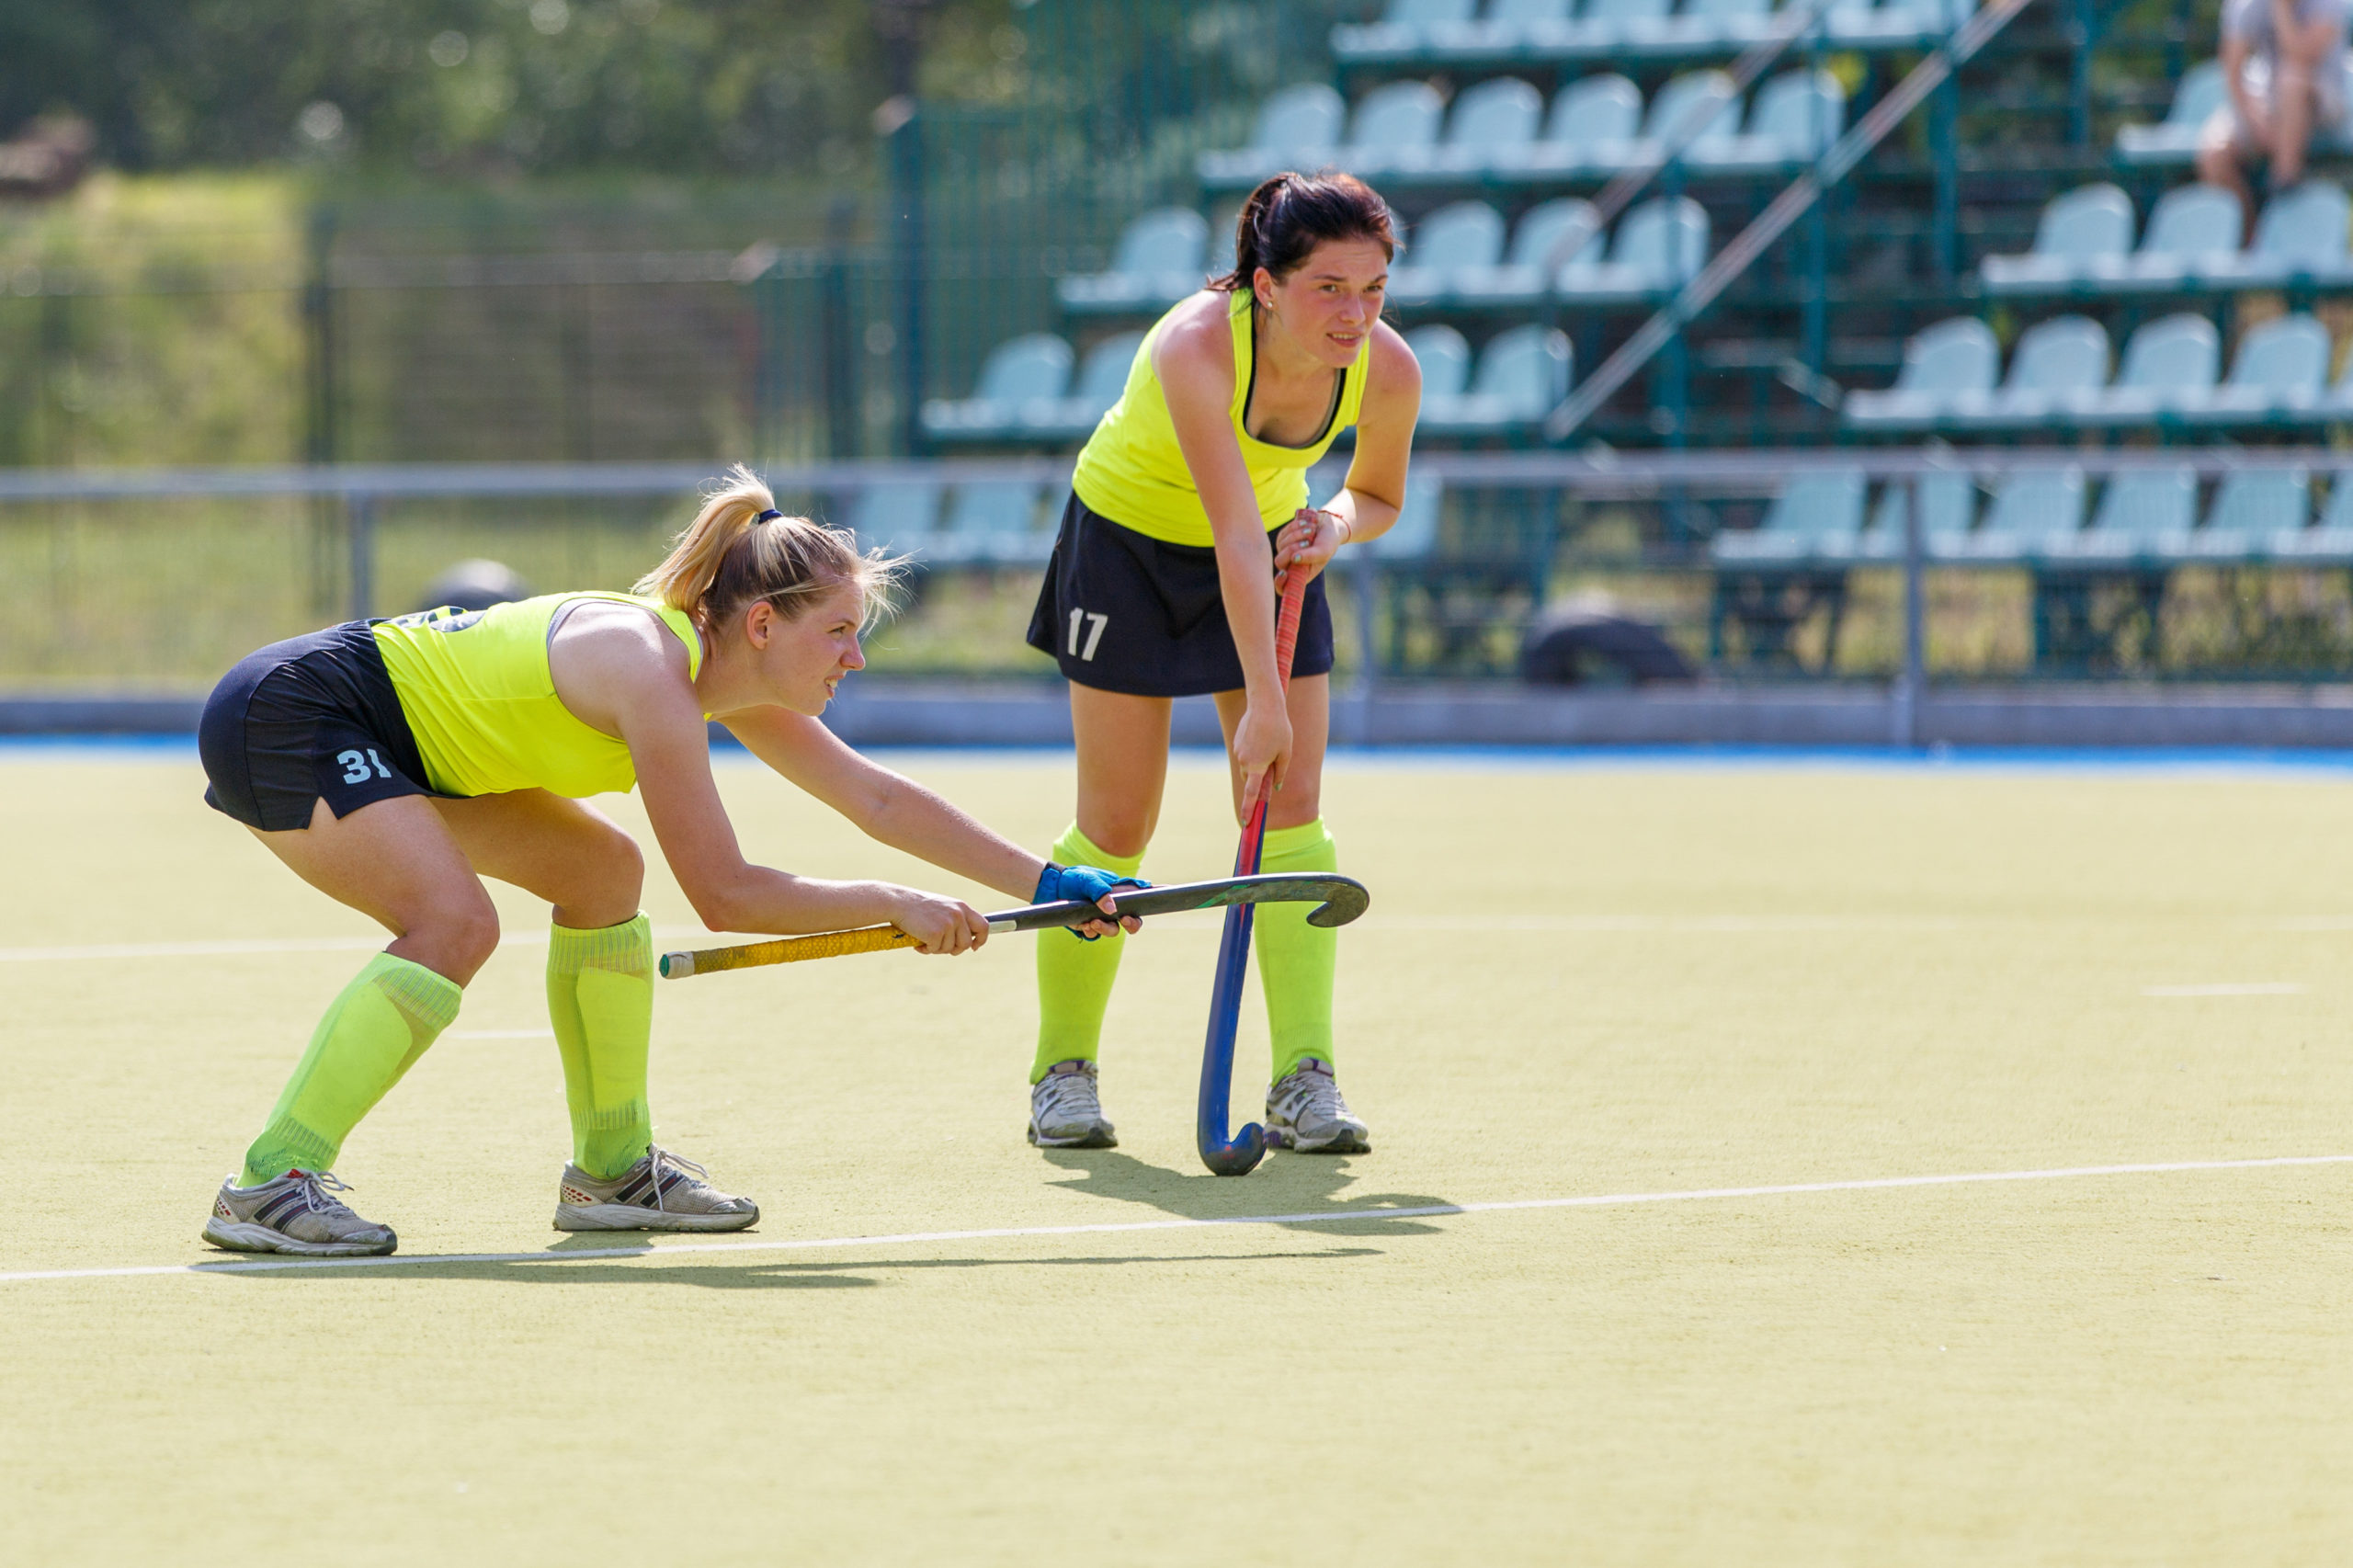 Two young field hockey player girls